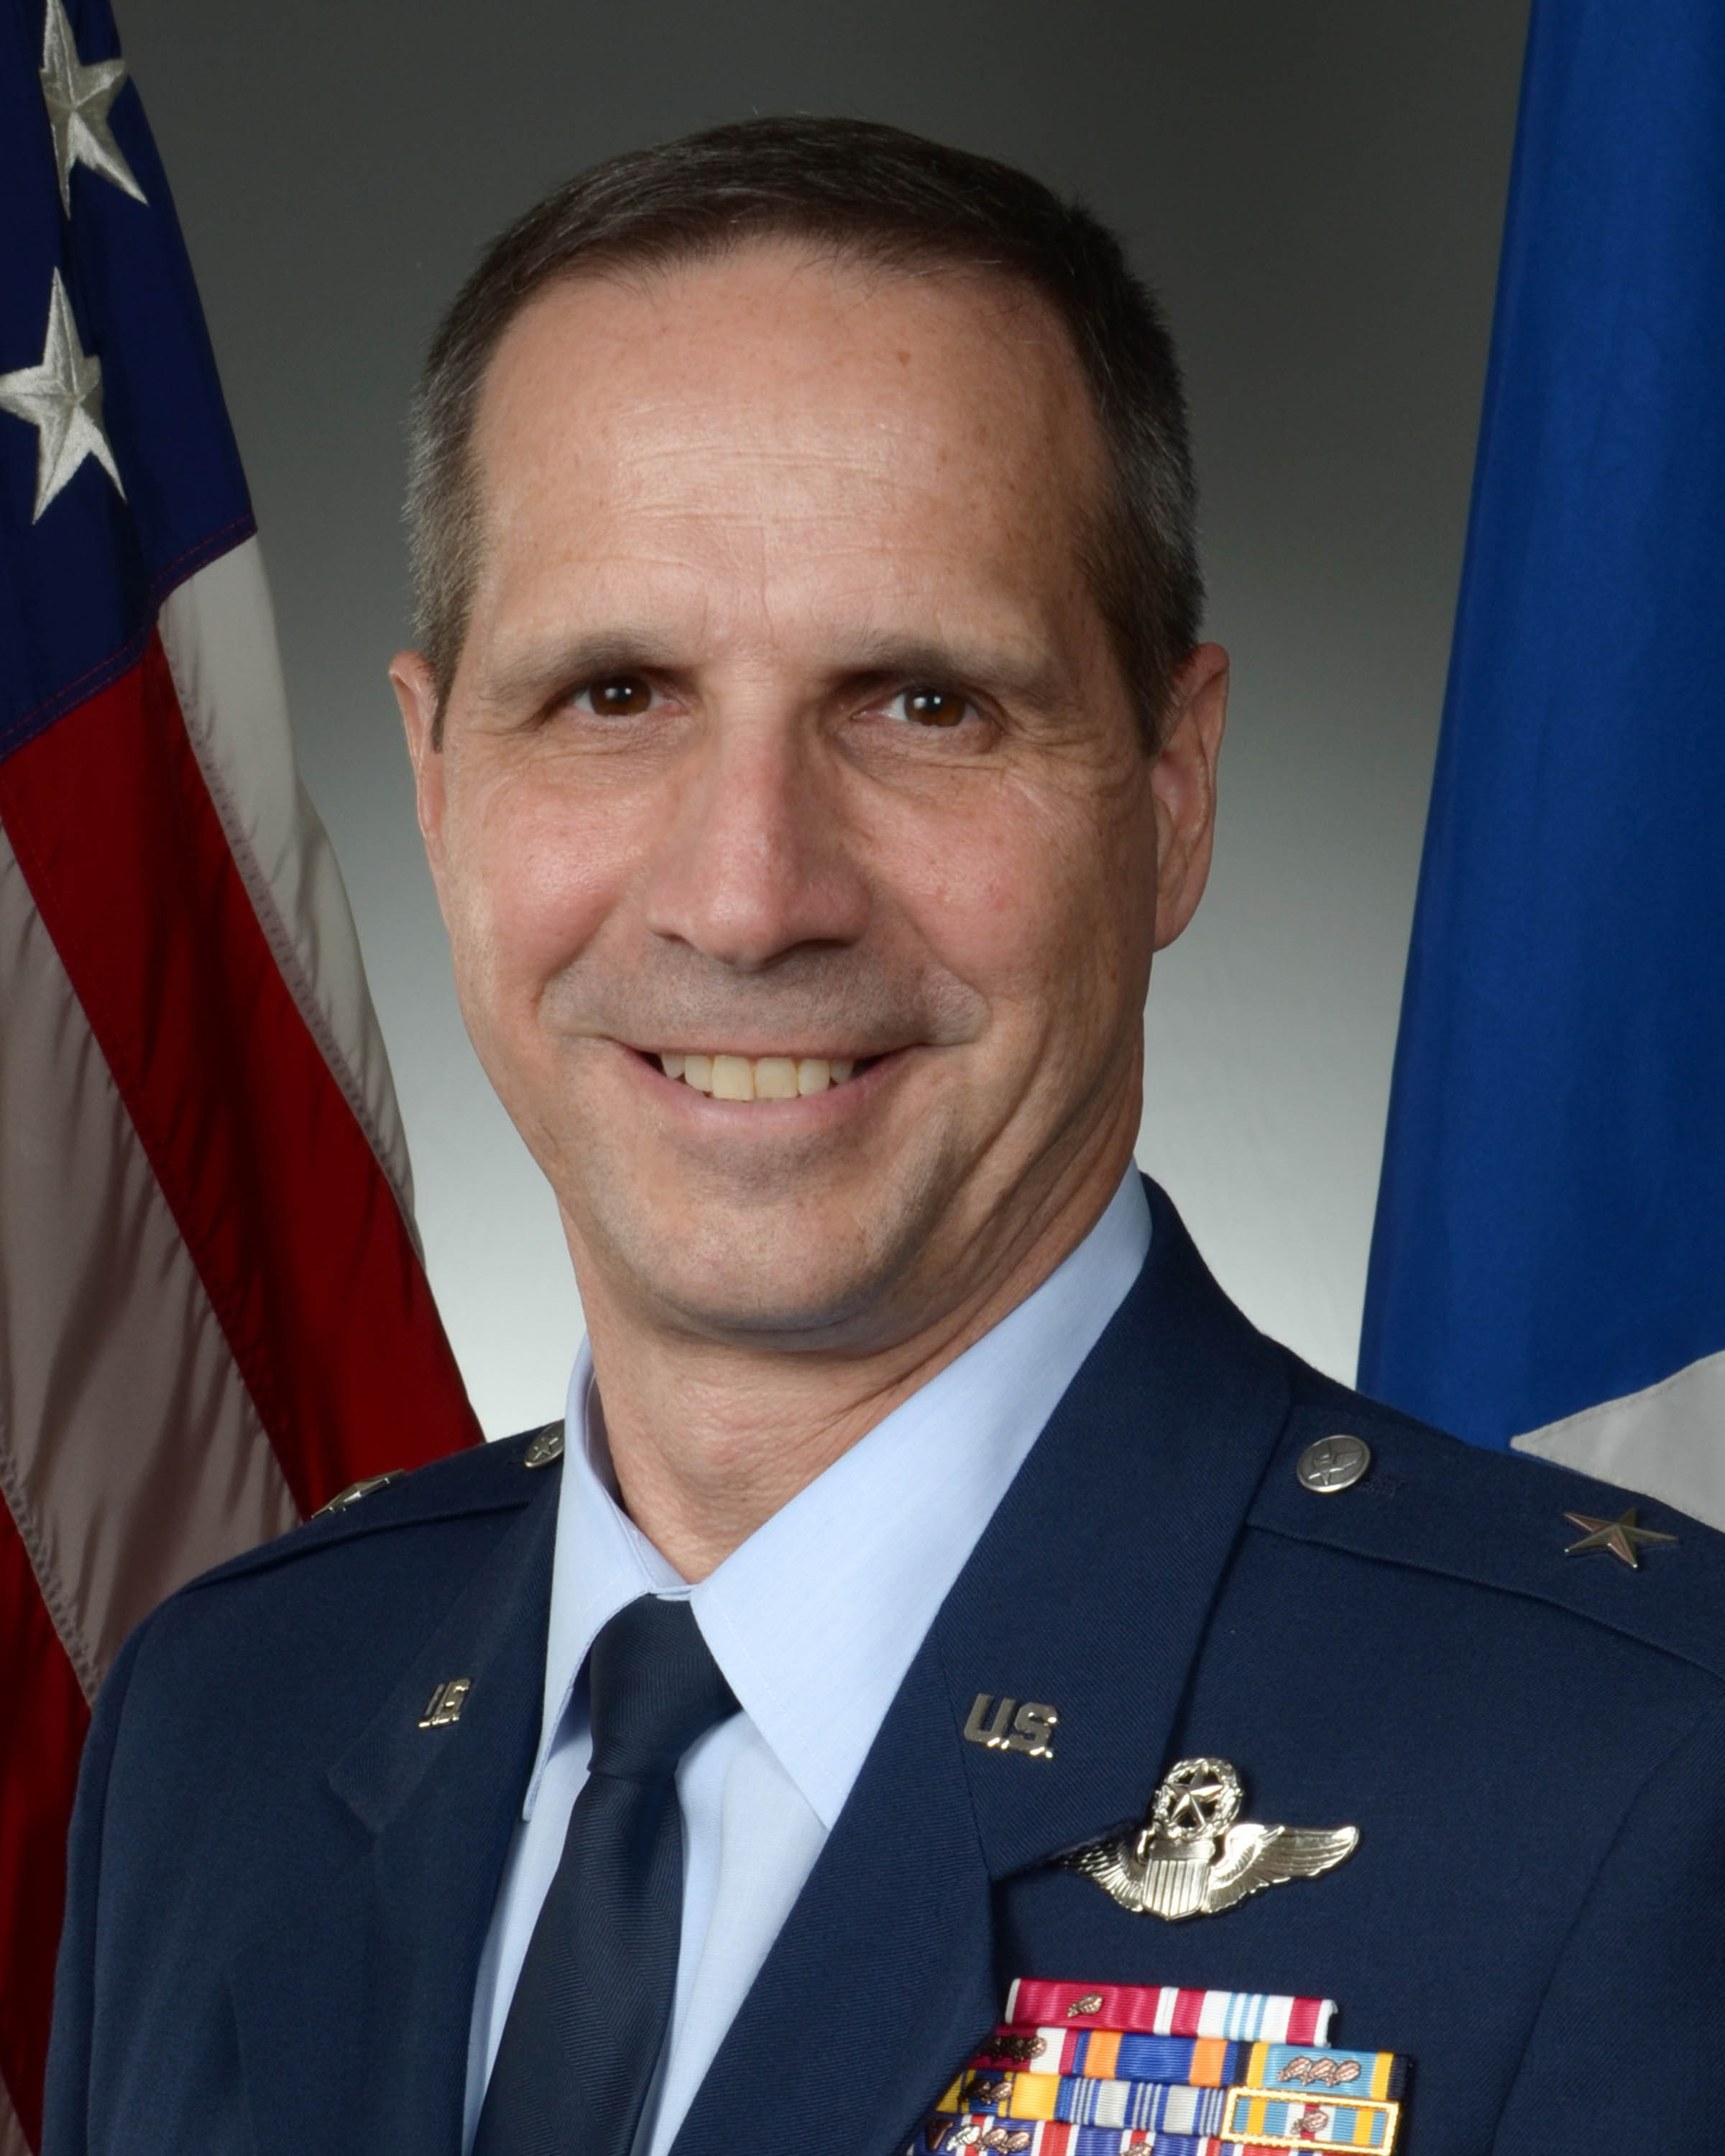 Image of 4th Air Force Commander which links to biography page